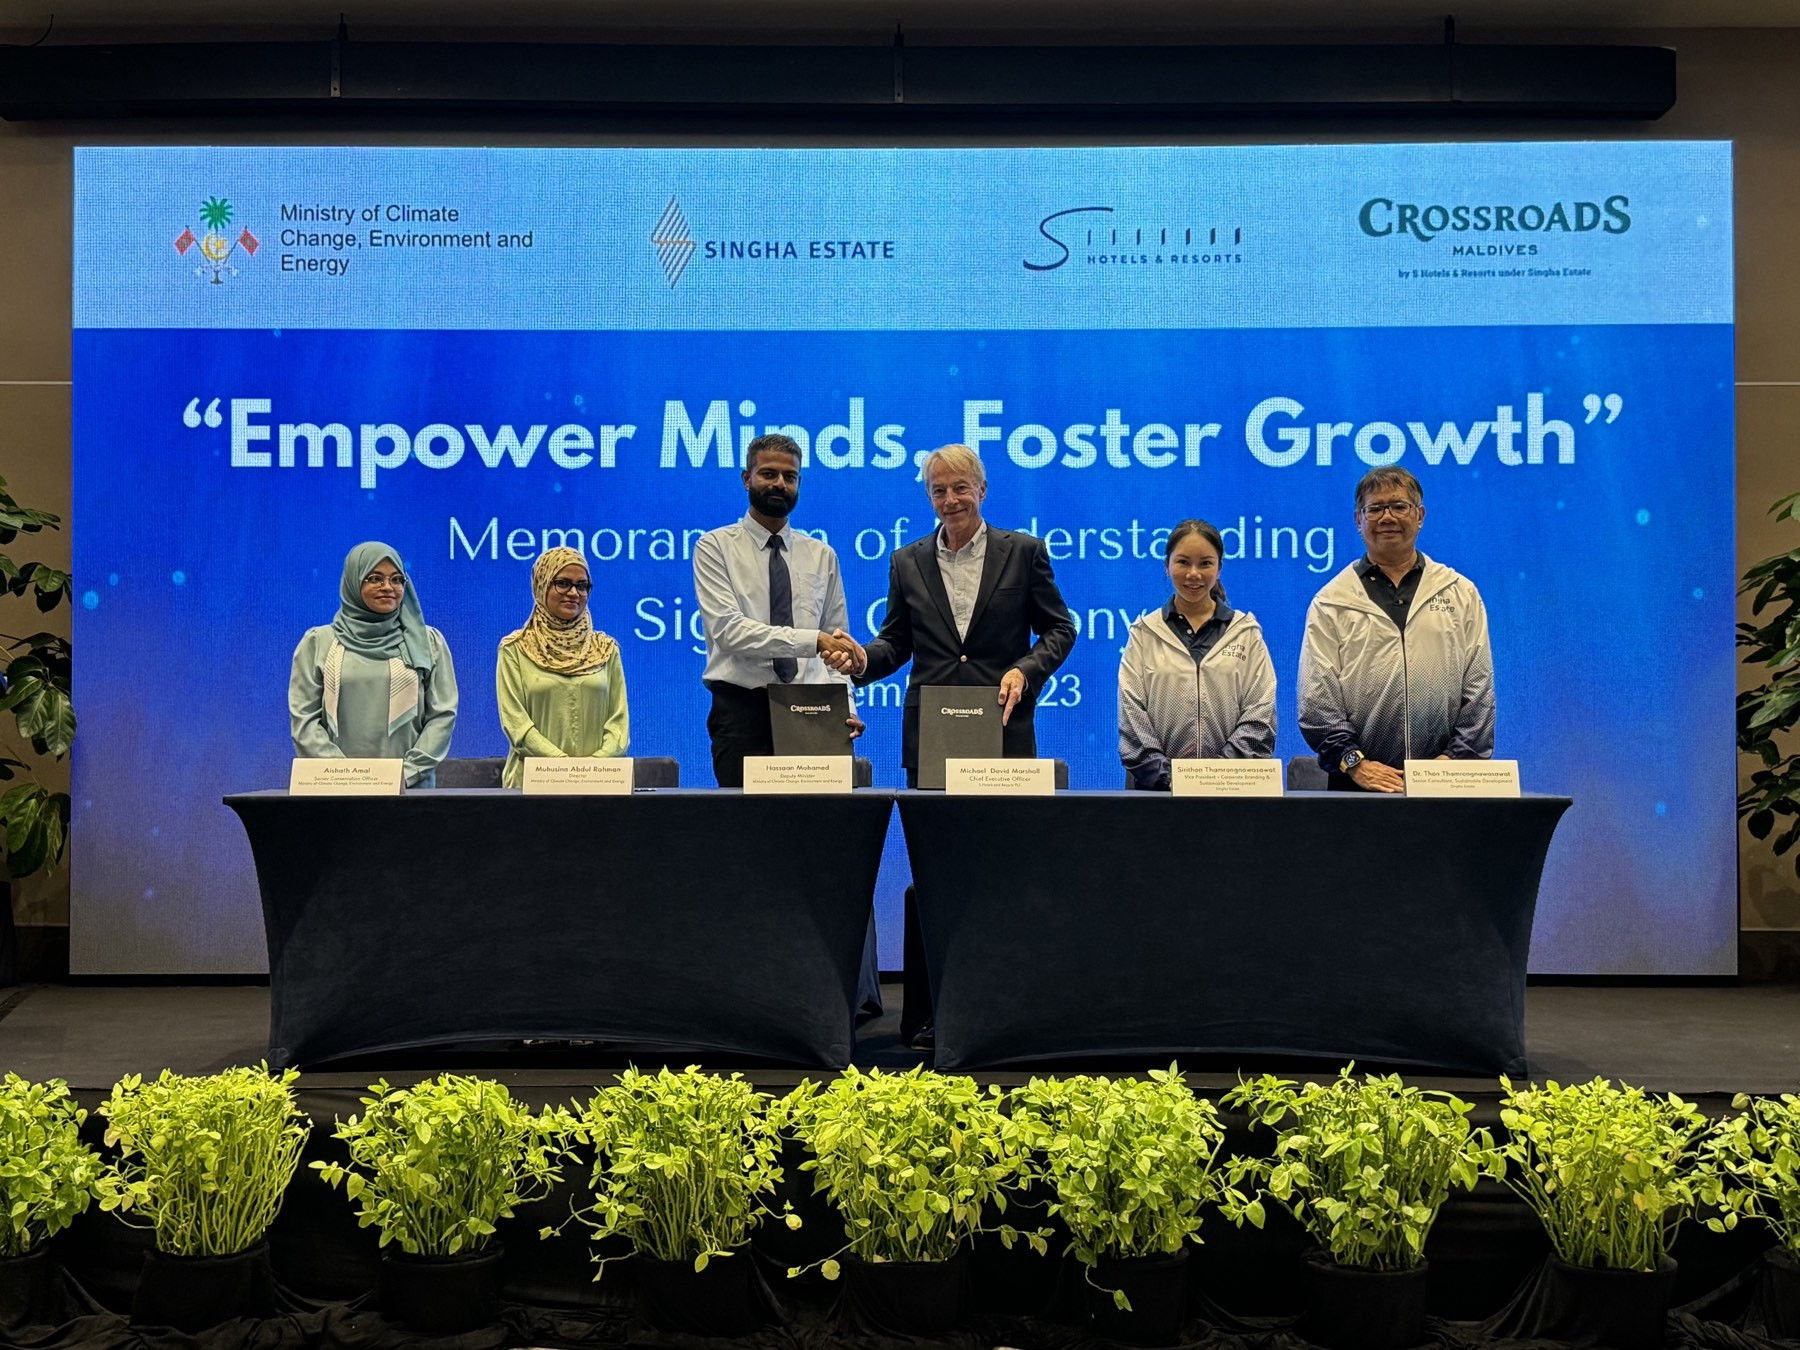 CROSSROADS Maldives and Ministry of Climate Change Forge Partnership